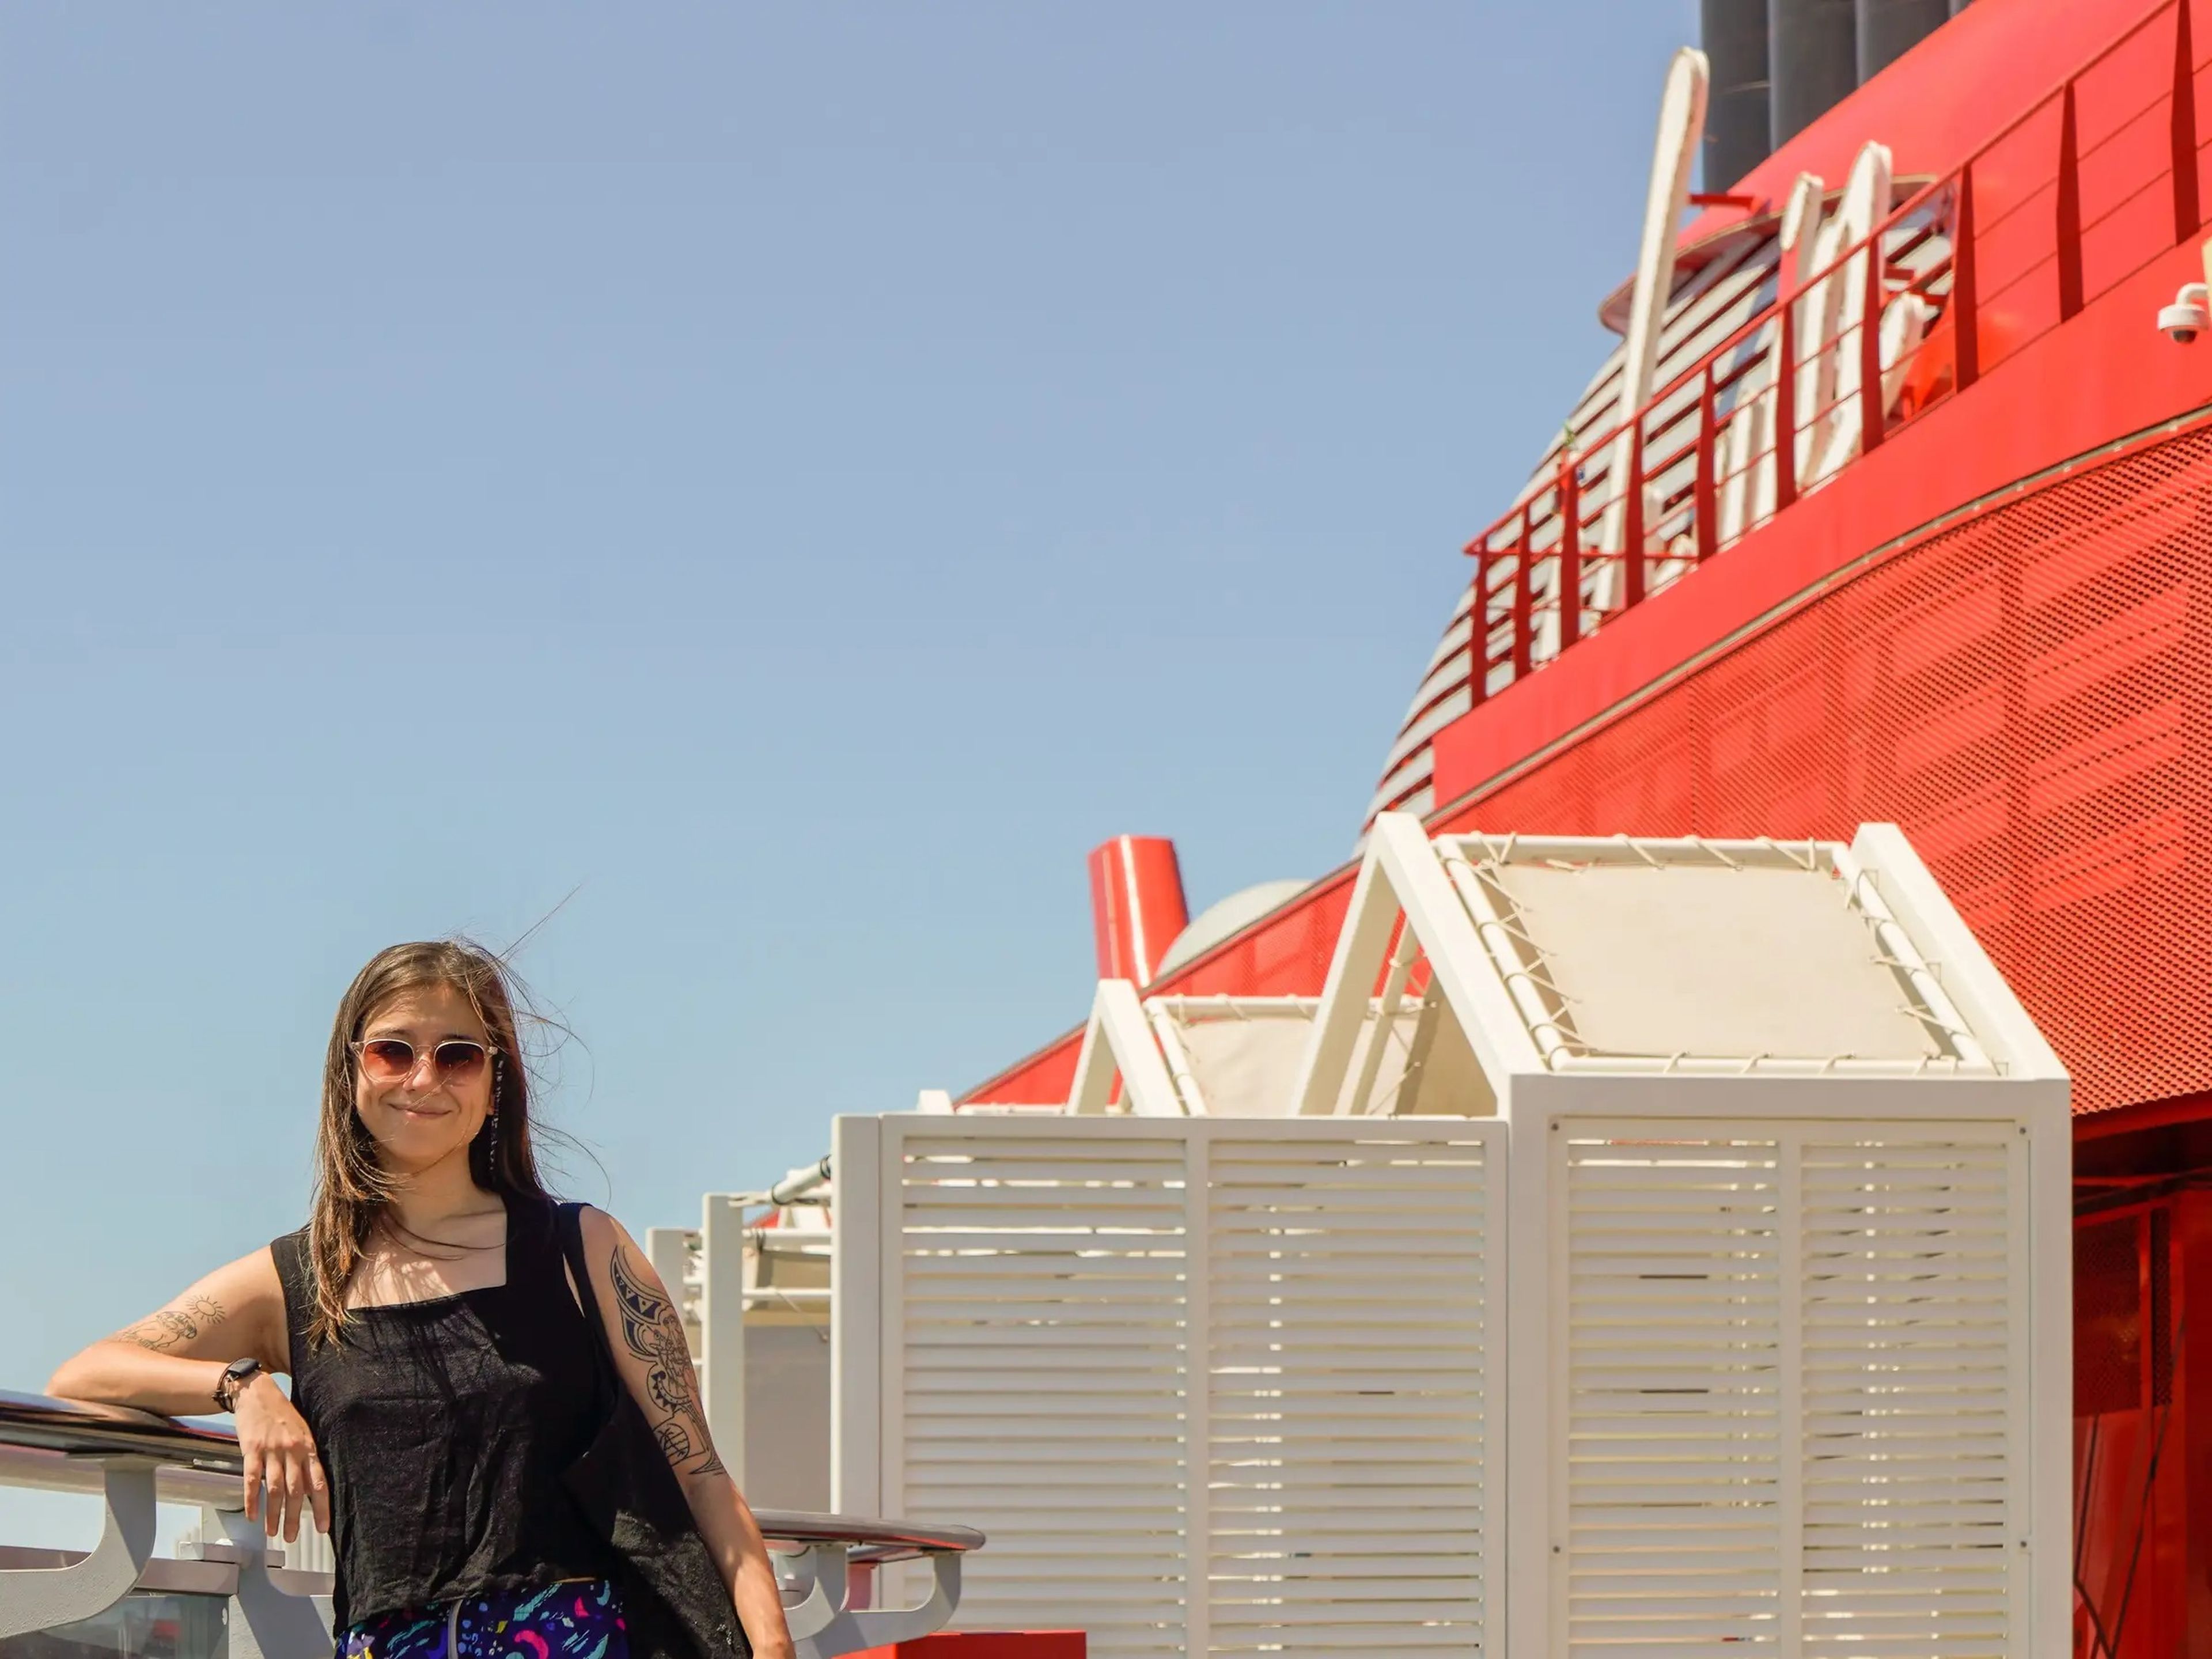 The author leans against the side of a cruise ship with blue skies behind her.